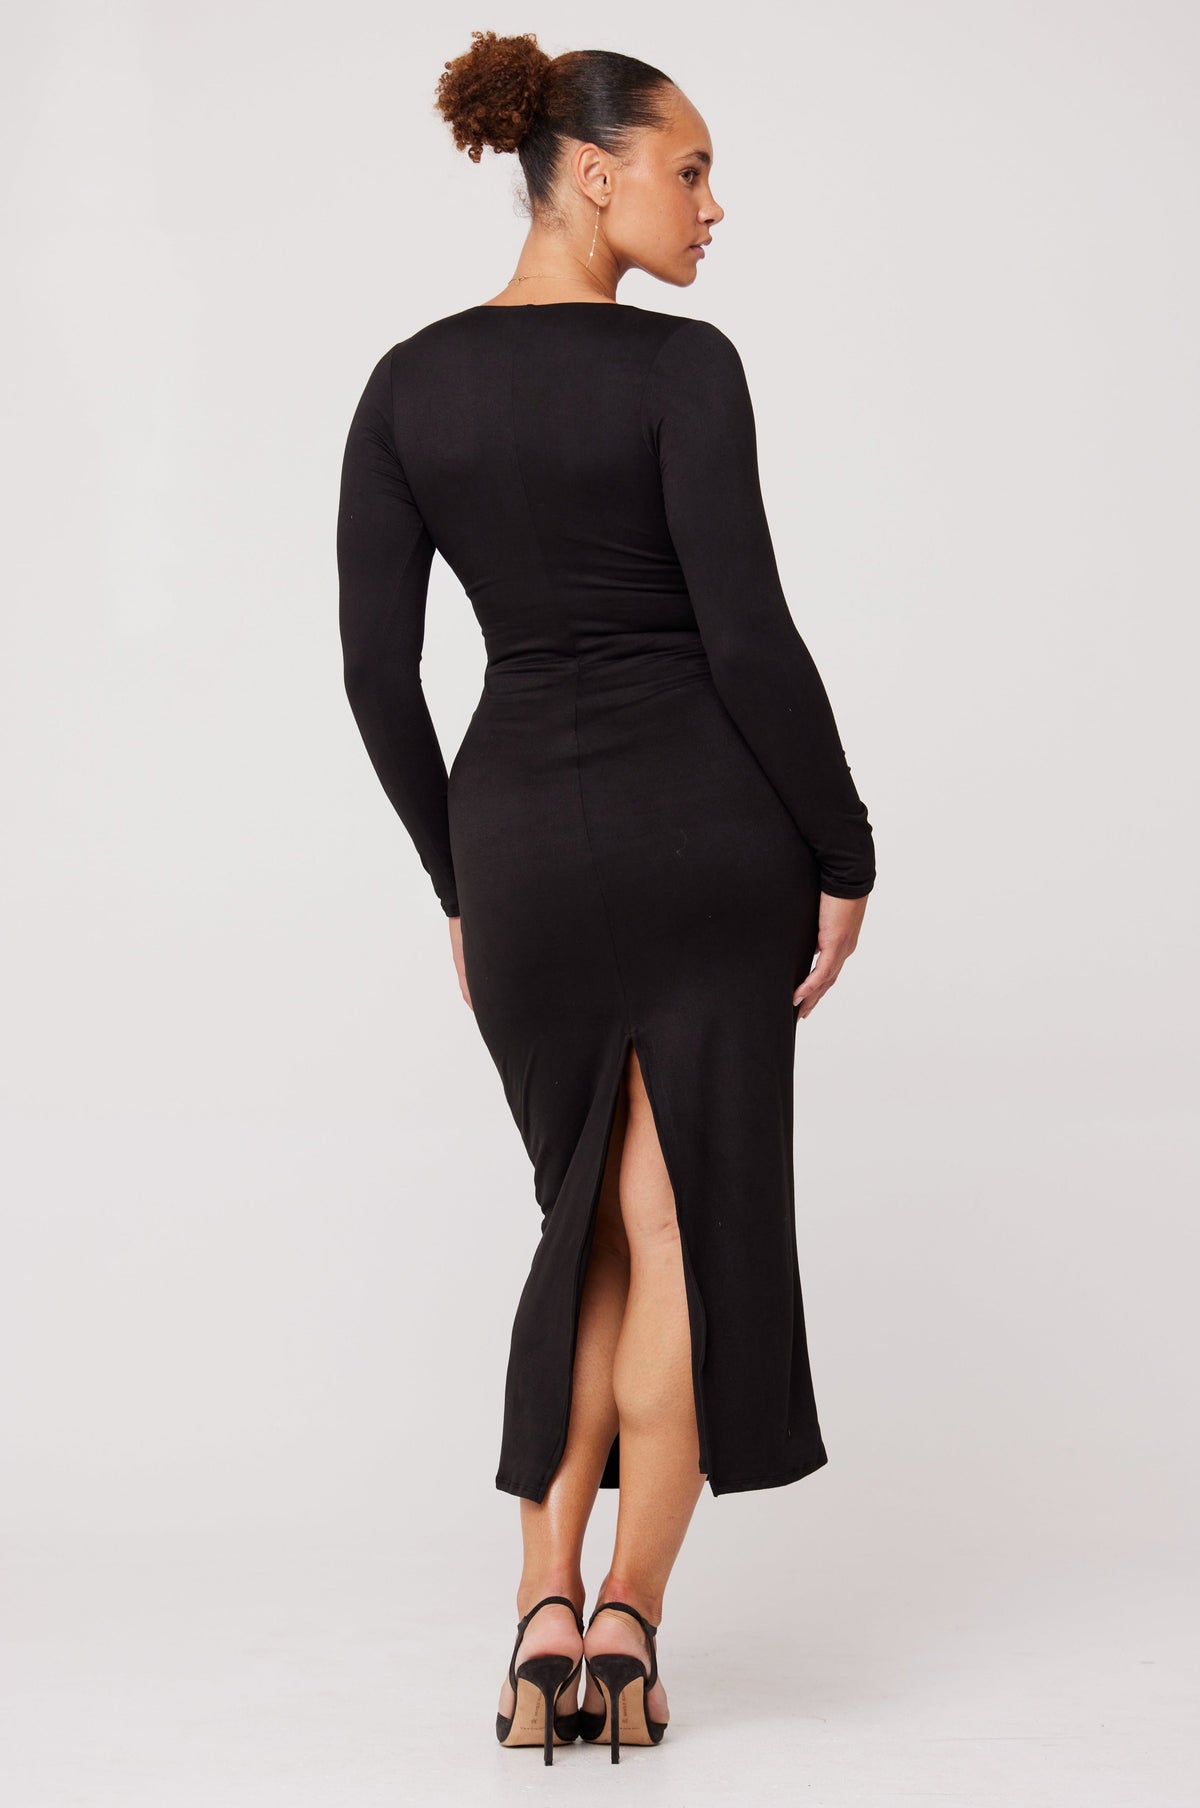 This is an image of Simone Dress in Black - RESA featuring a model wearing the dress